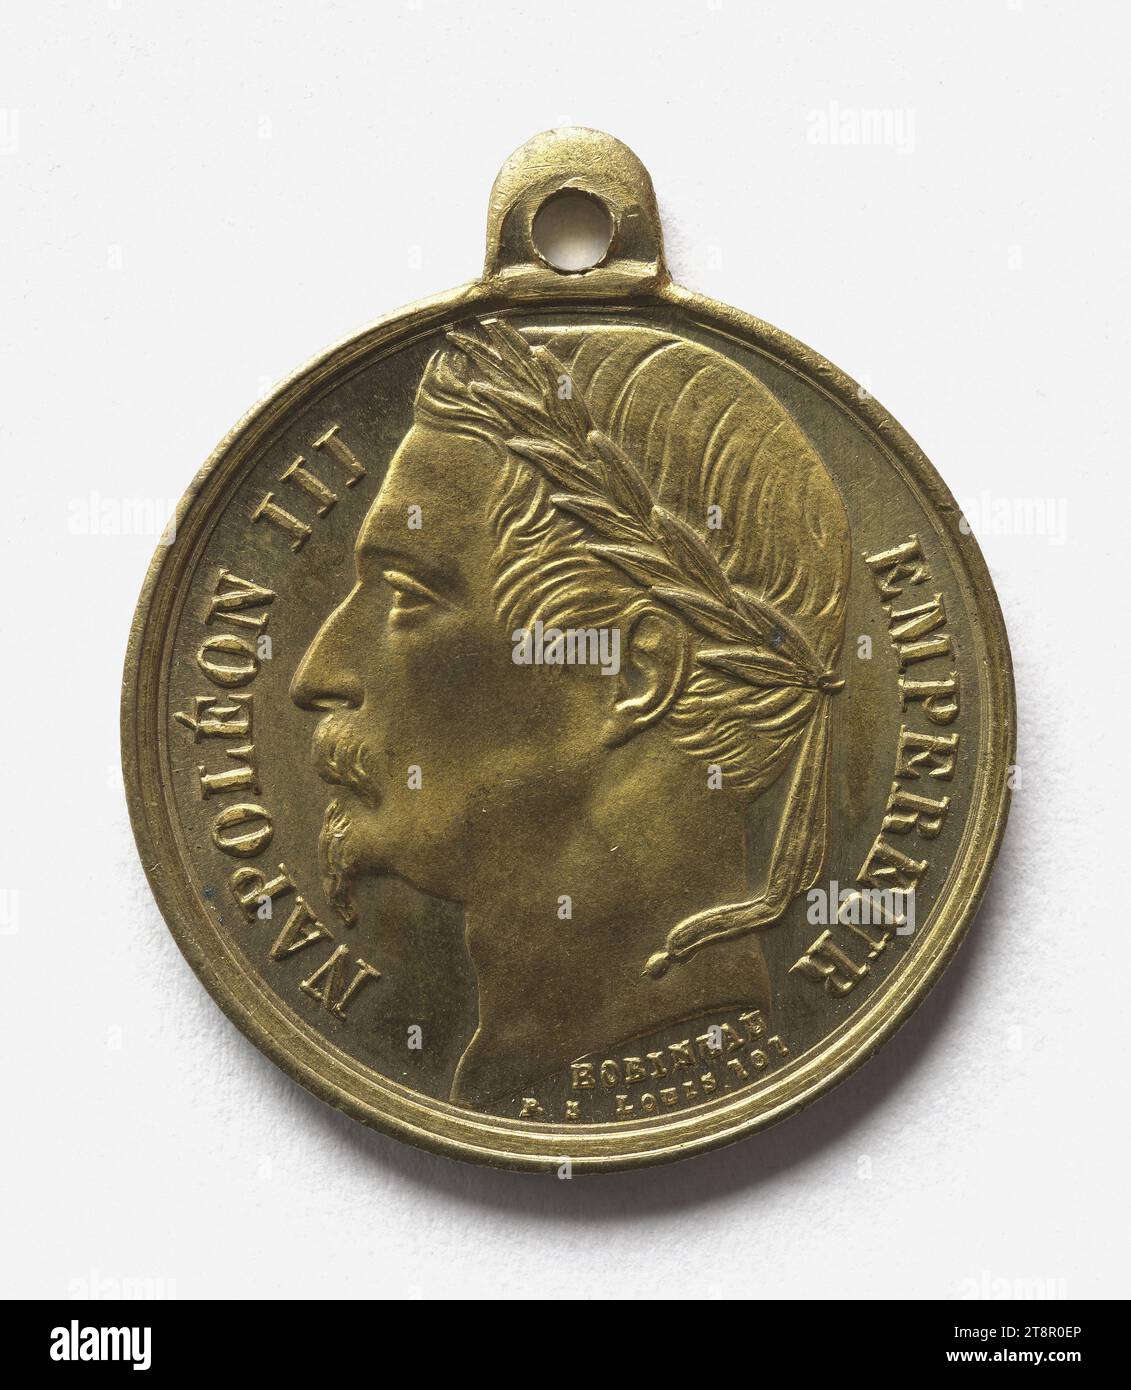 Napoleon III (1808-1873) proclaimed emperor by the plebiscite of November 21 and 22, 1852, Robineau, Engraver in medals, In 1852, Numismatic, Medal, Paris, Dimensions - Work: Diameter: 2.3 cm, Weight (type dimension): 4.05 g Stock Photo